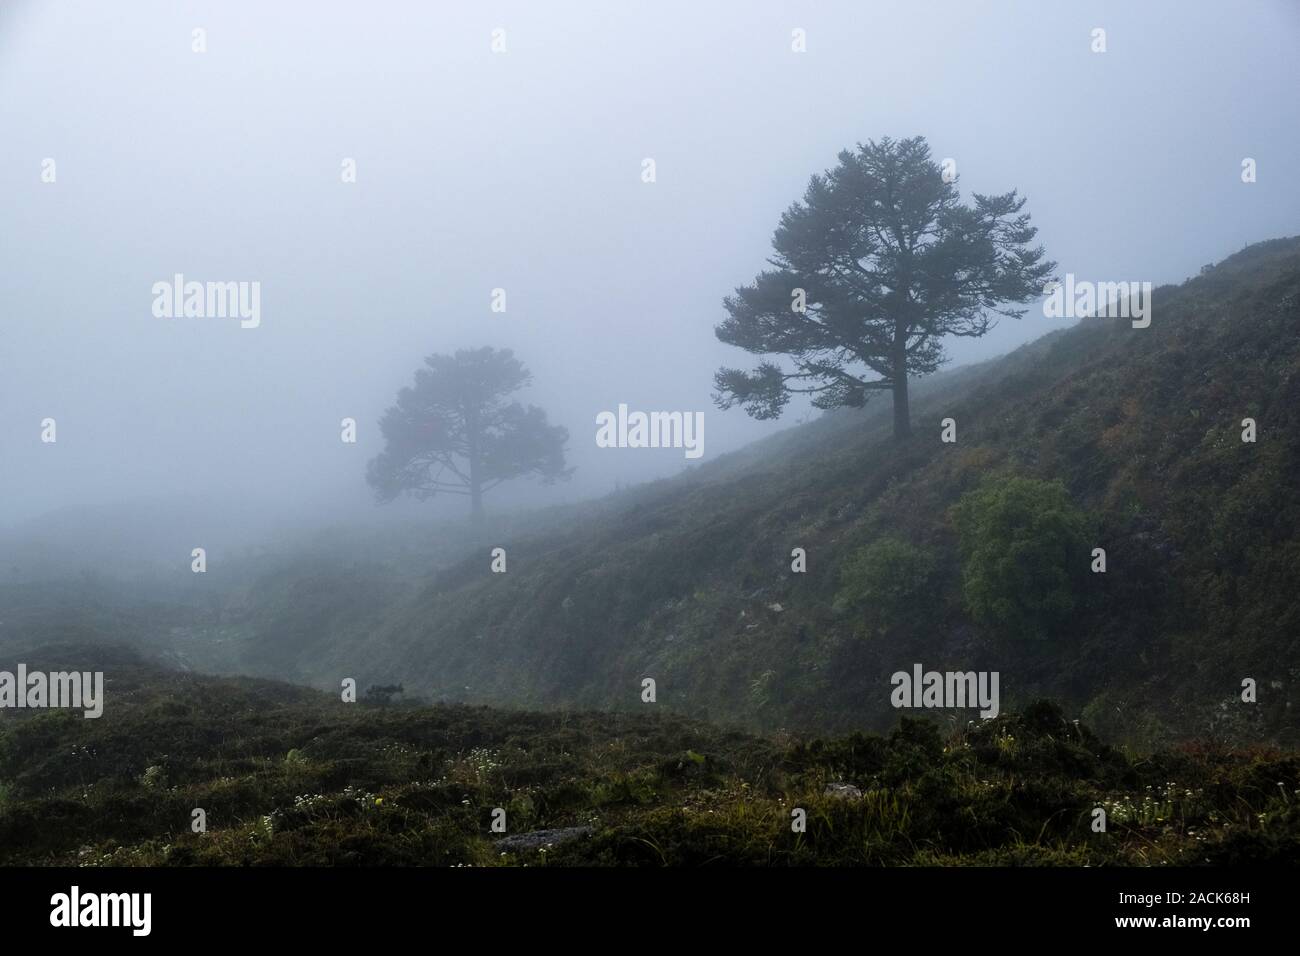 Mountainous landscape with two single trees covered in monsoon clouds and fog Stock Photo